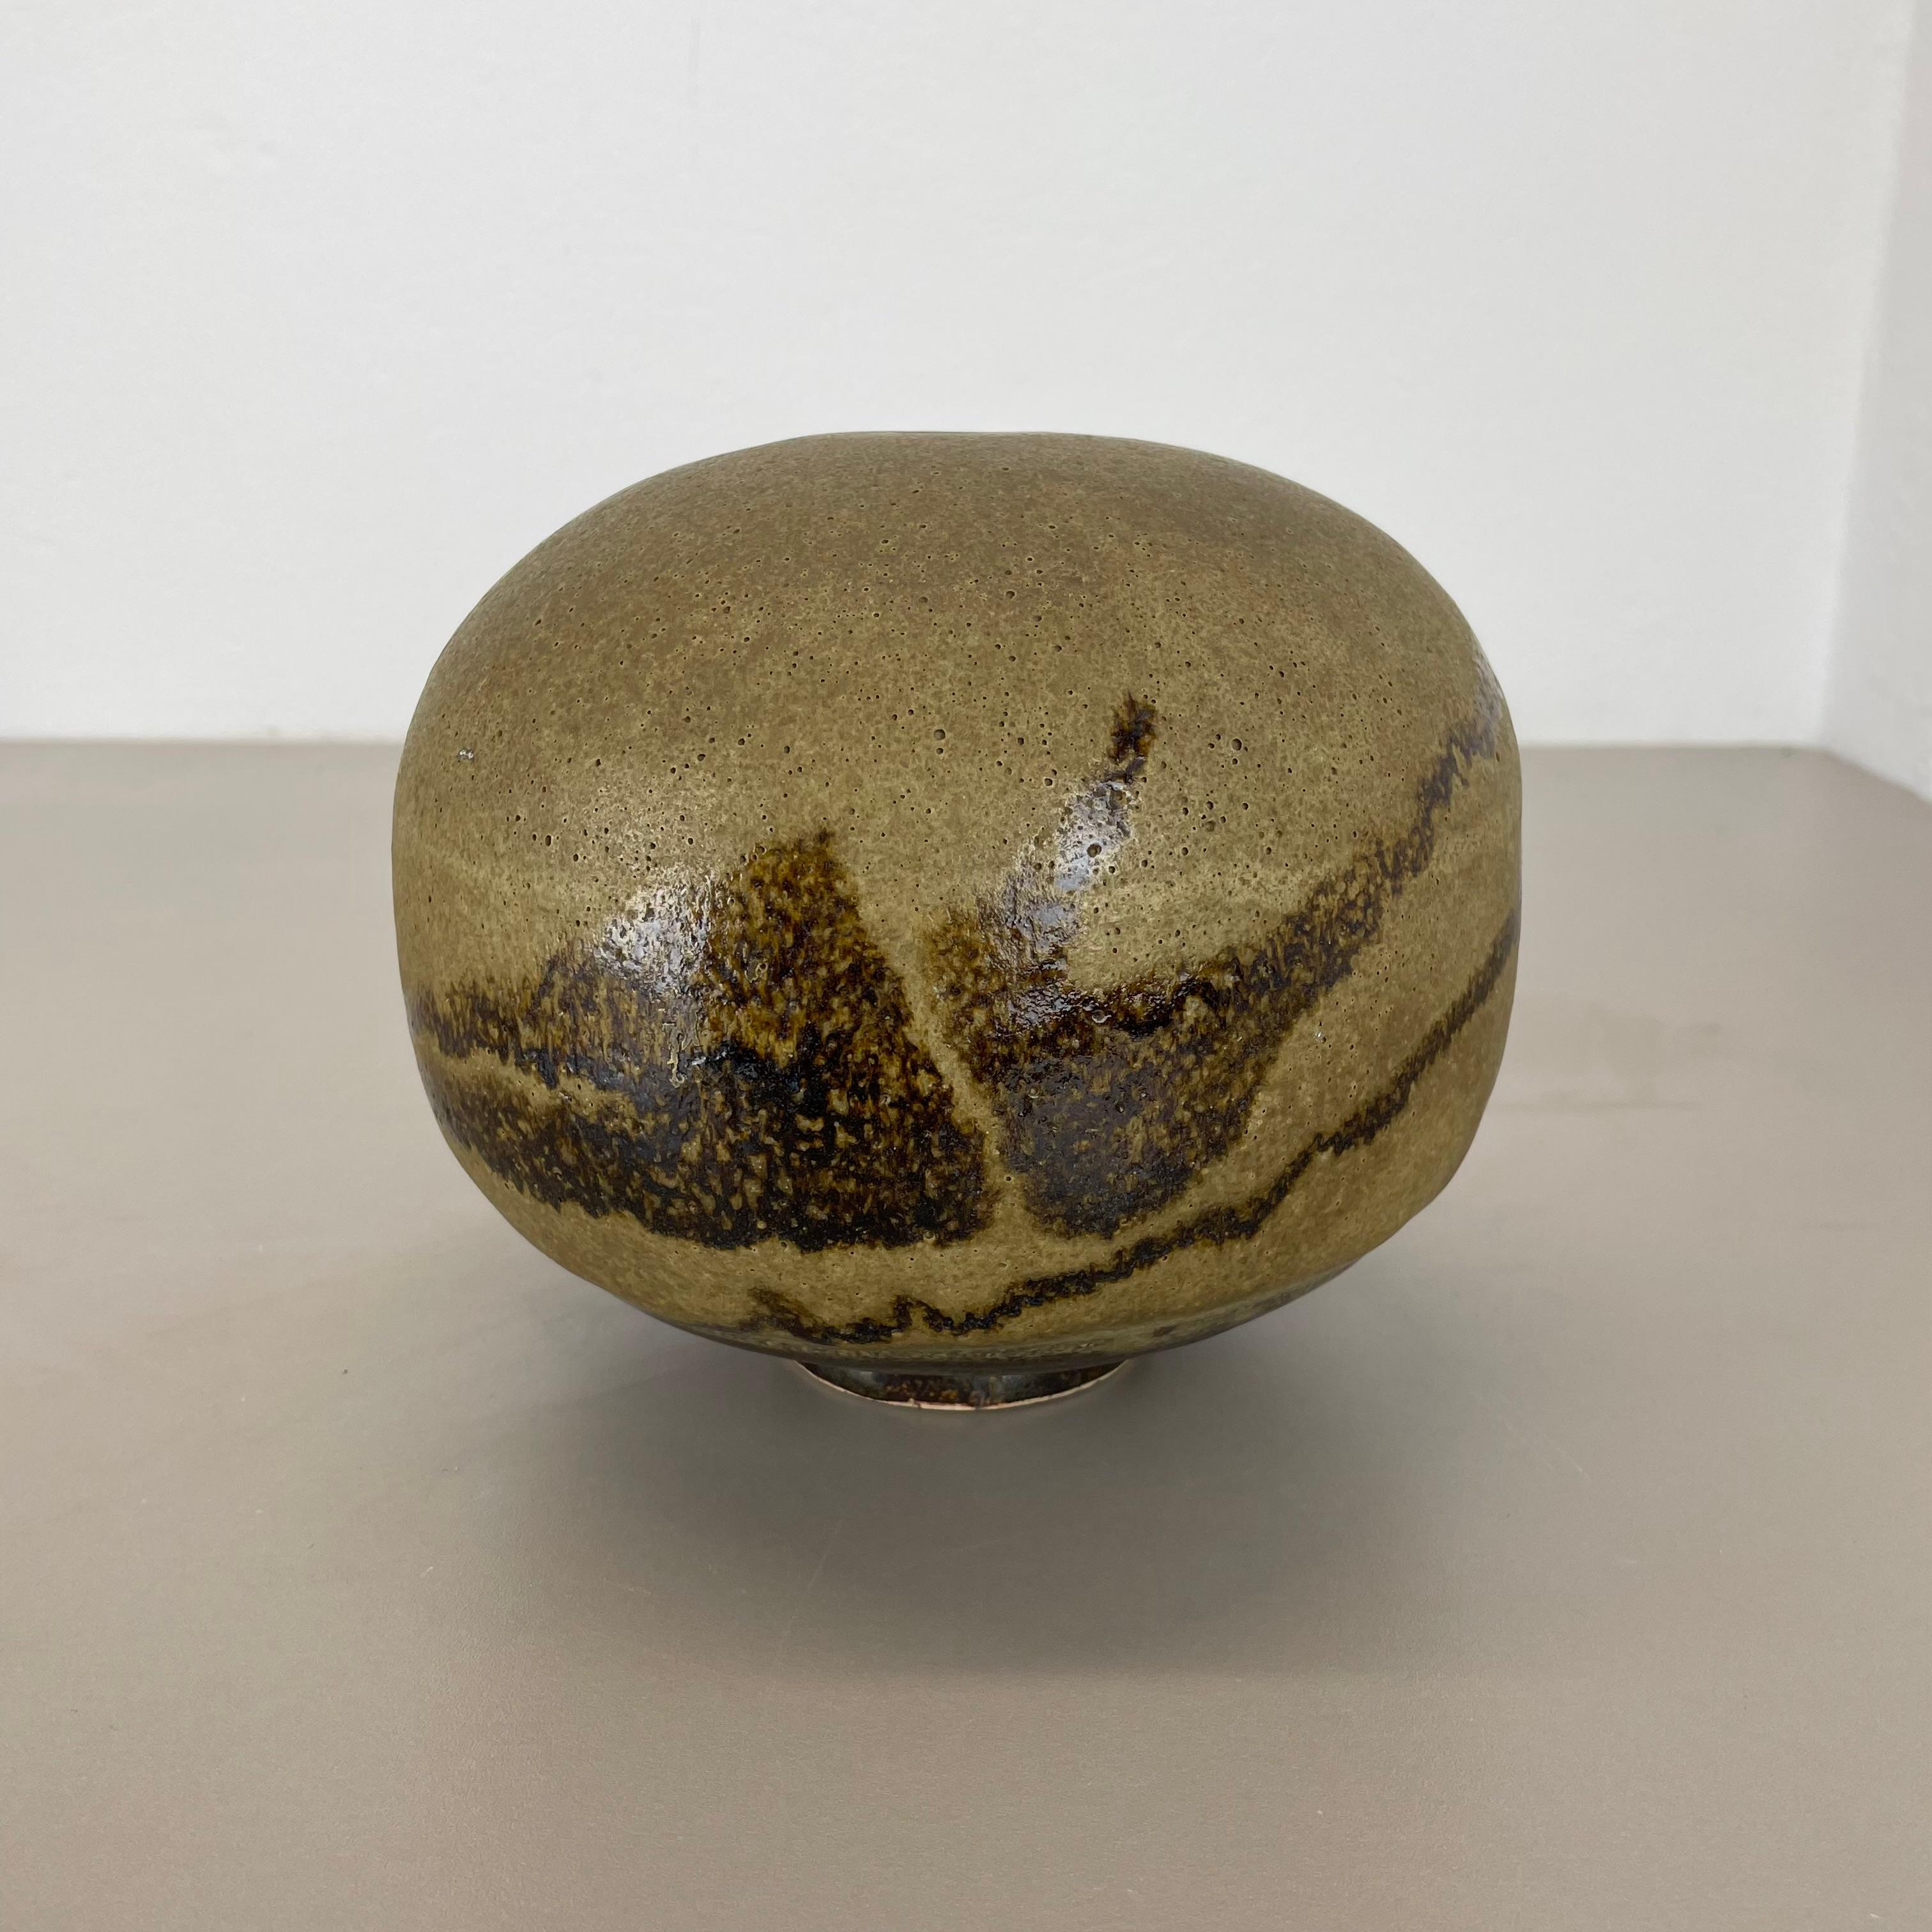 Article:

Ceramic object


Designer and producer:

Dieter Crumbiegel

Information:

Dieter Crumbiegel (born June 6, 1938 in Essen) is a German artist (painting, ceramics) and university professor.
Since 1961, Crumbiegel has held solo and group